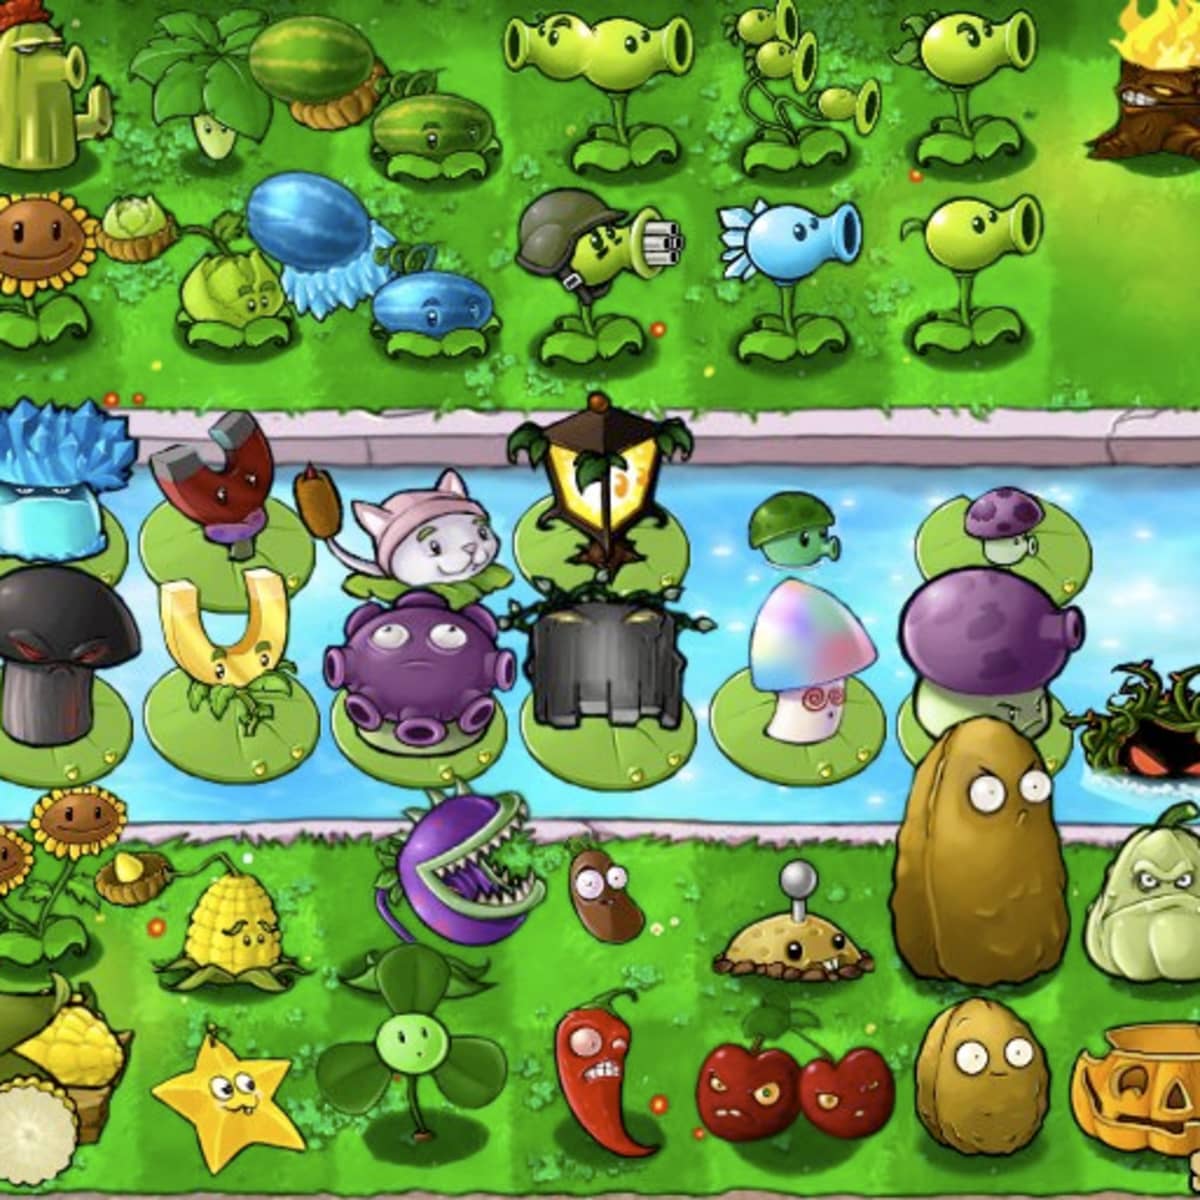 Ranking EVERY Plants VS Zombies Game From WORST to BEST (Top 6 PVZ